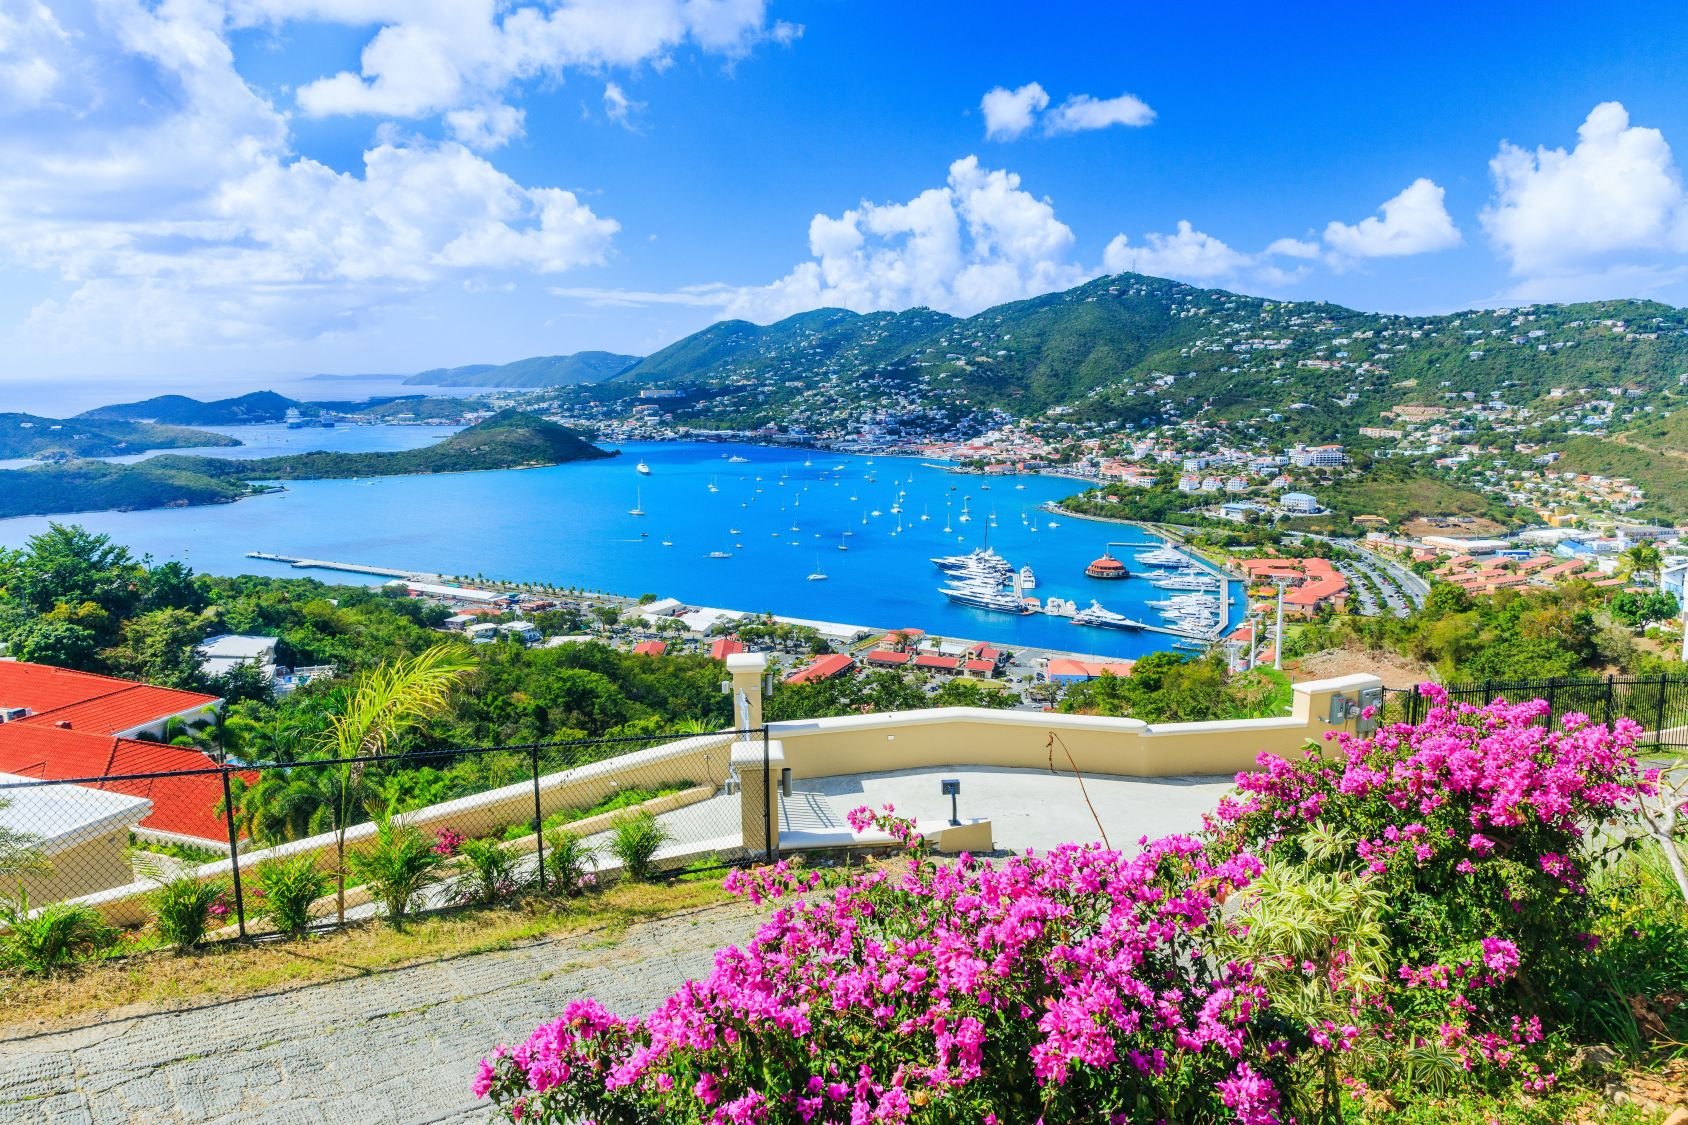 are the virgin islands nice to visit